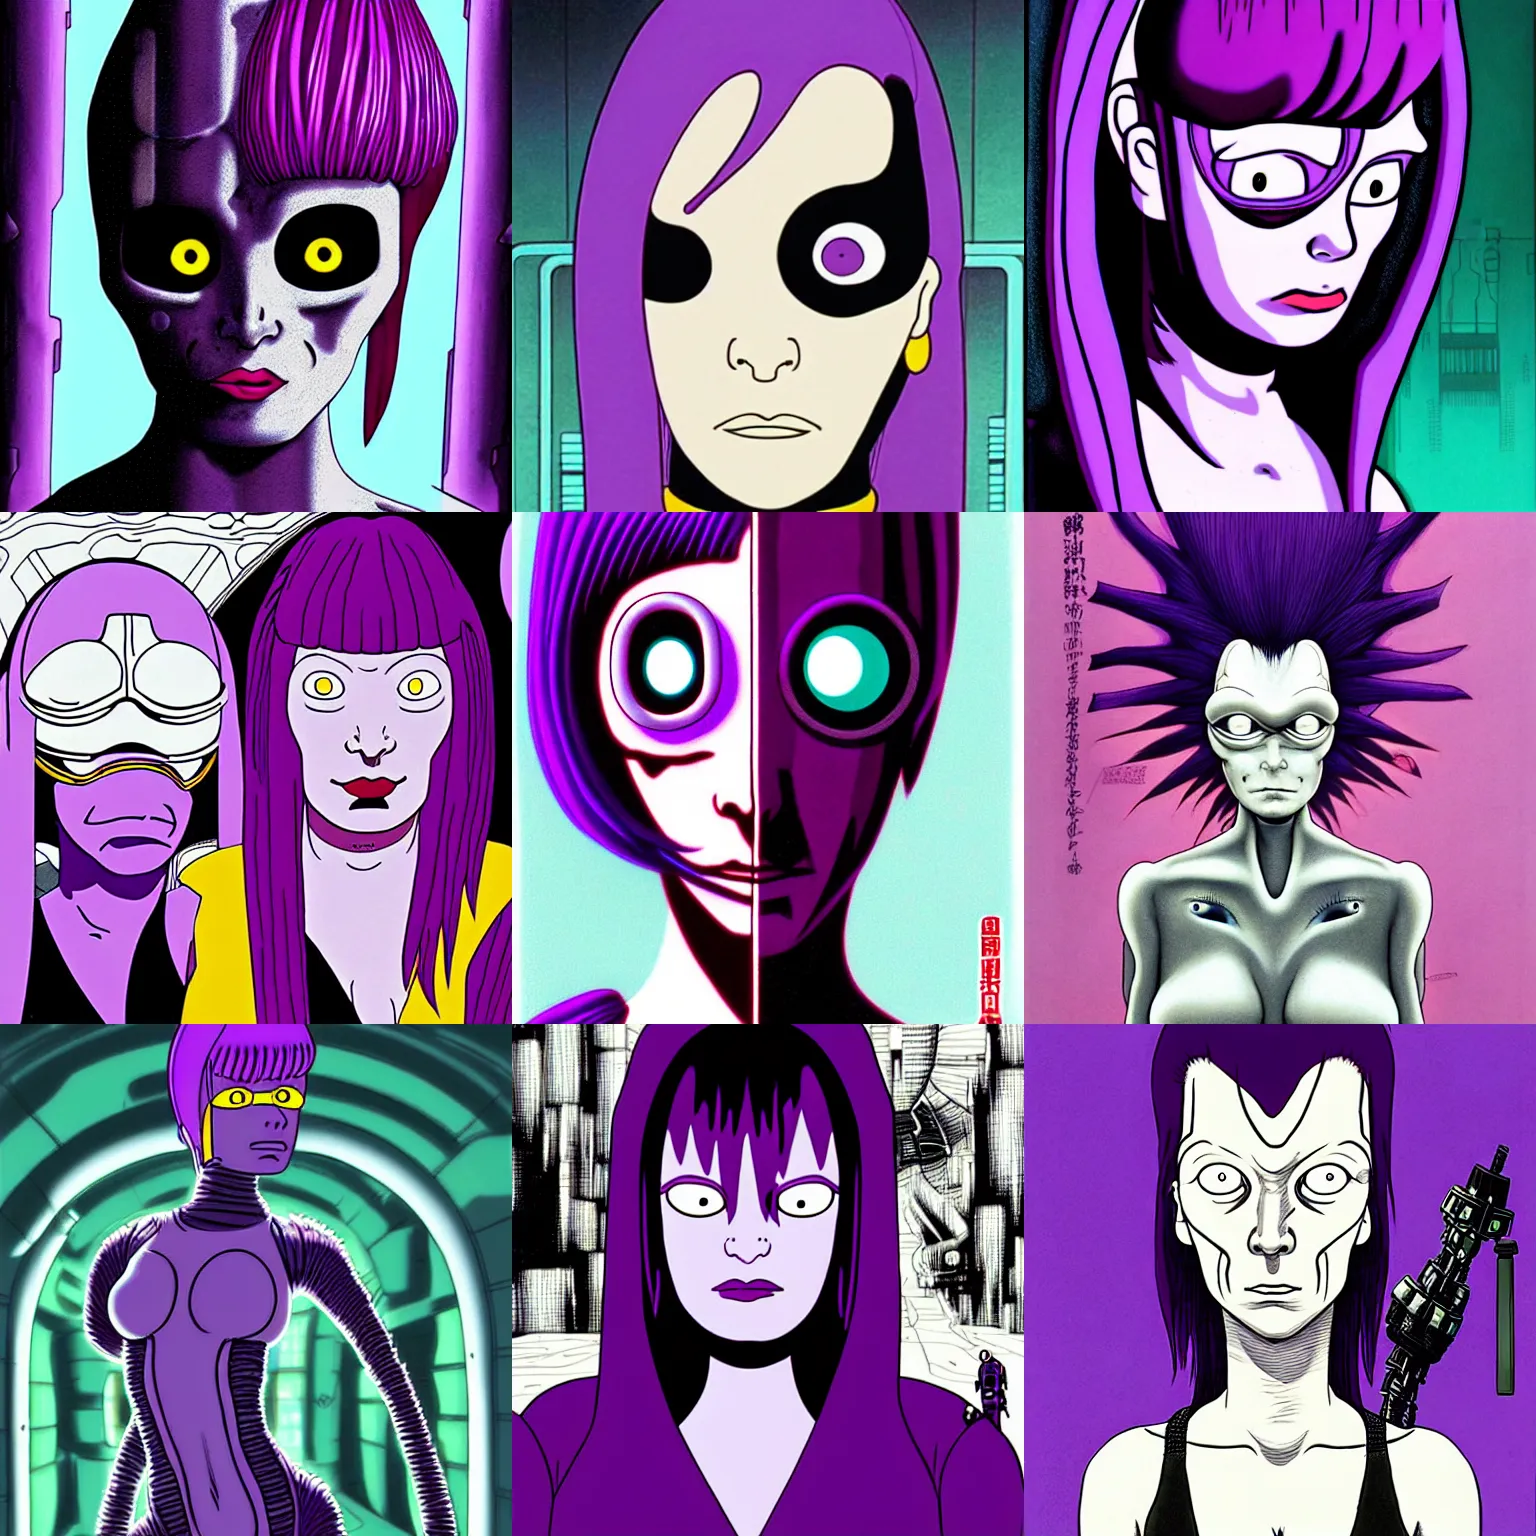 Prompt: portrait turanga leela with one eye from futurama in futuristic city, one eye from face, purple hair, by tsutomu nihei, by h. r. giger